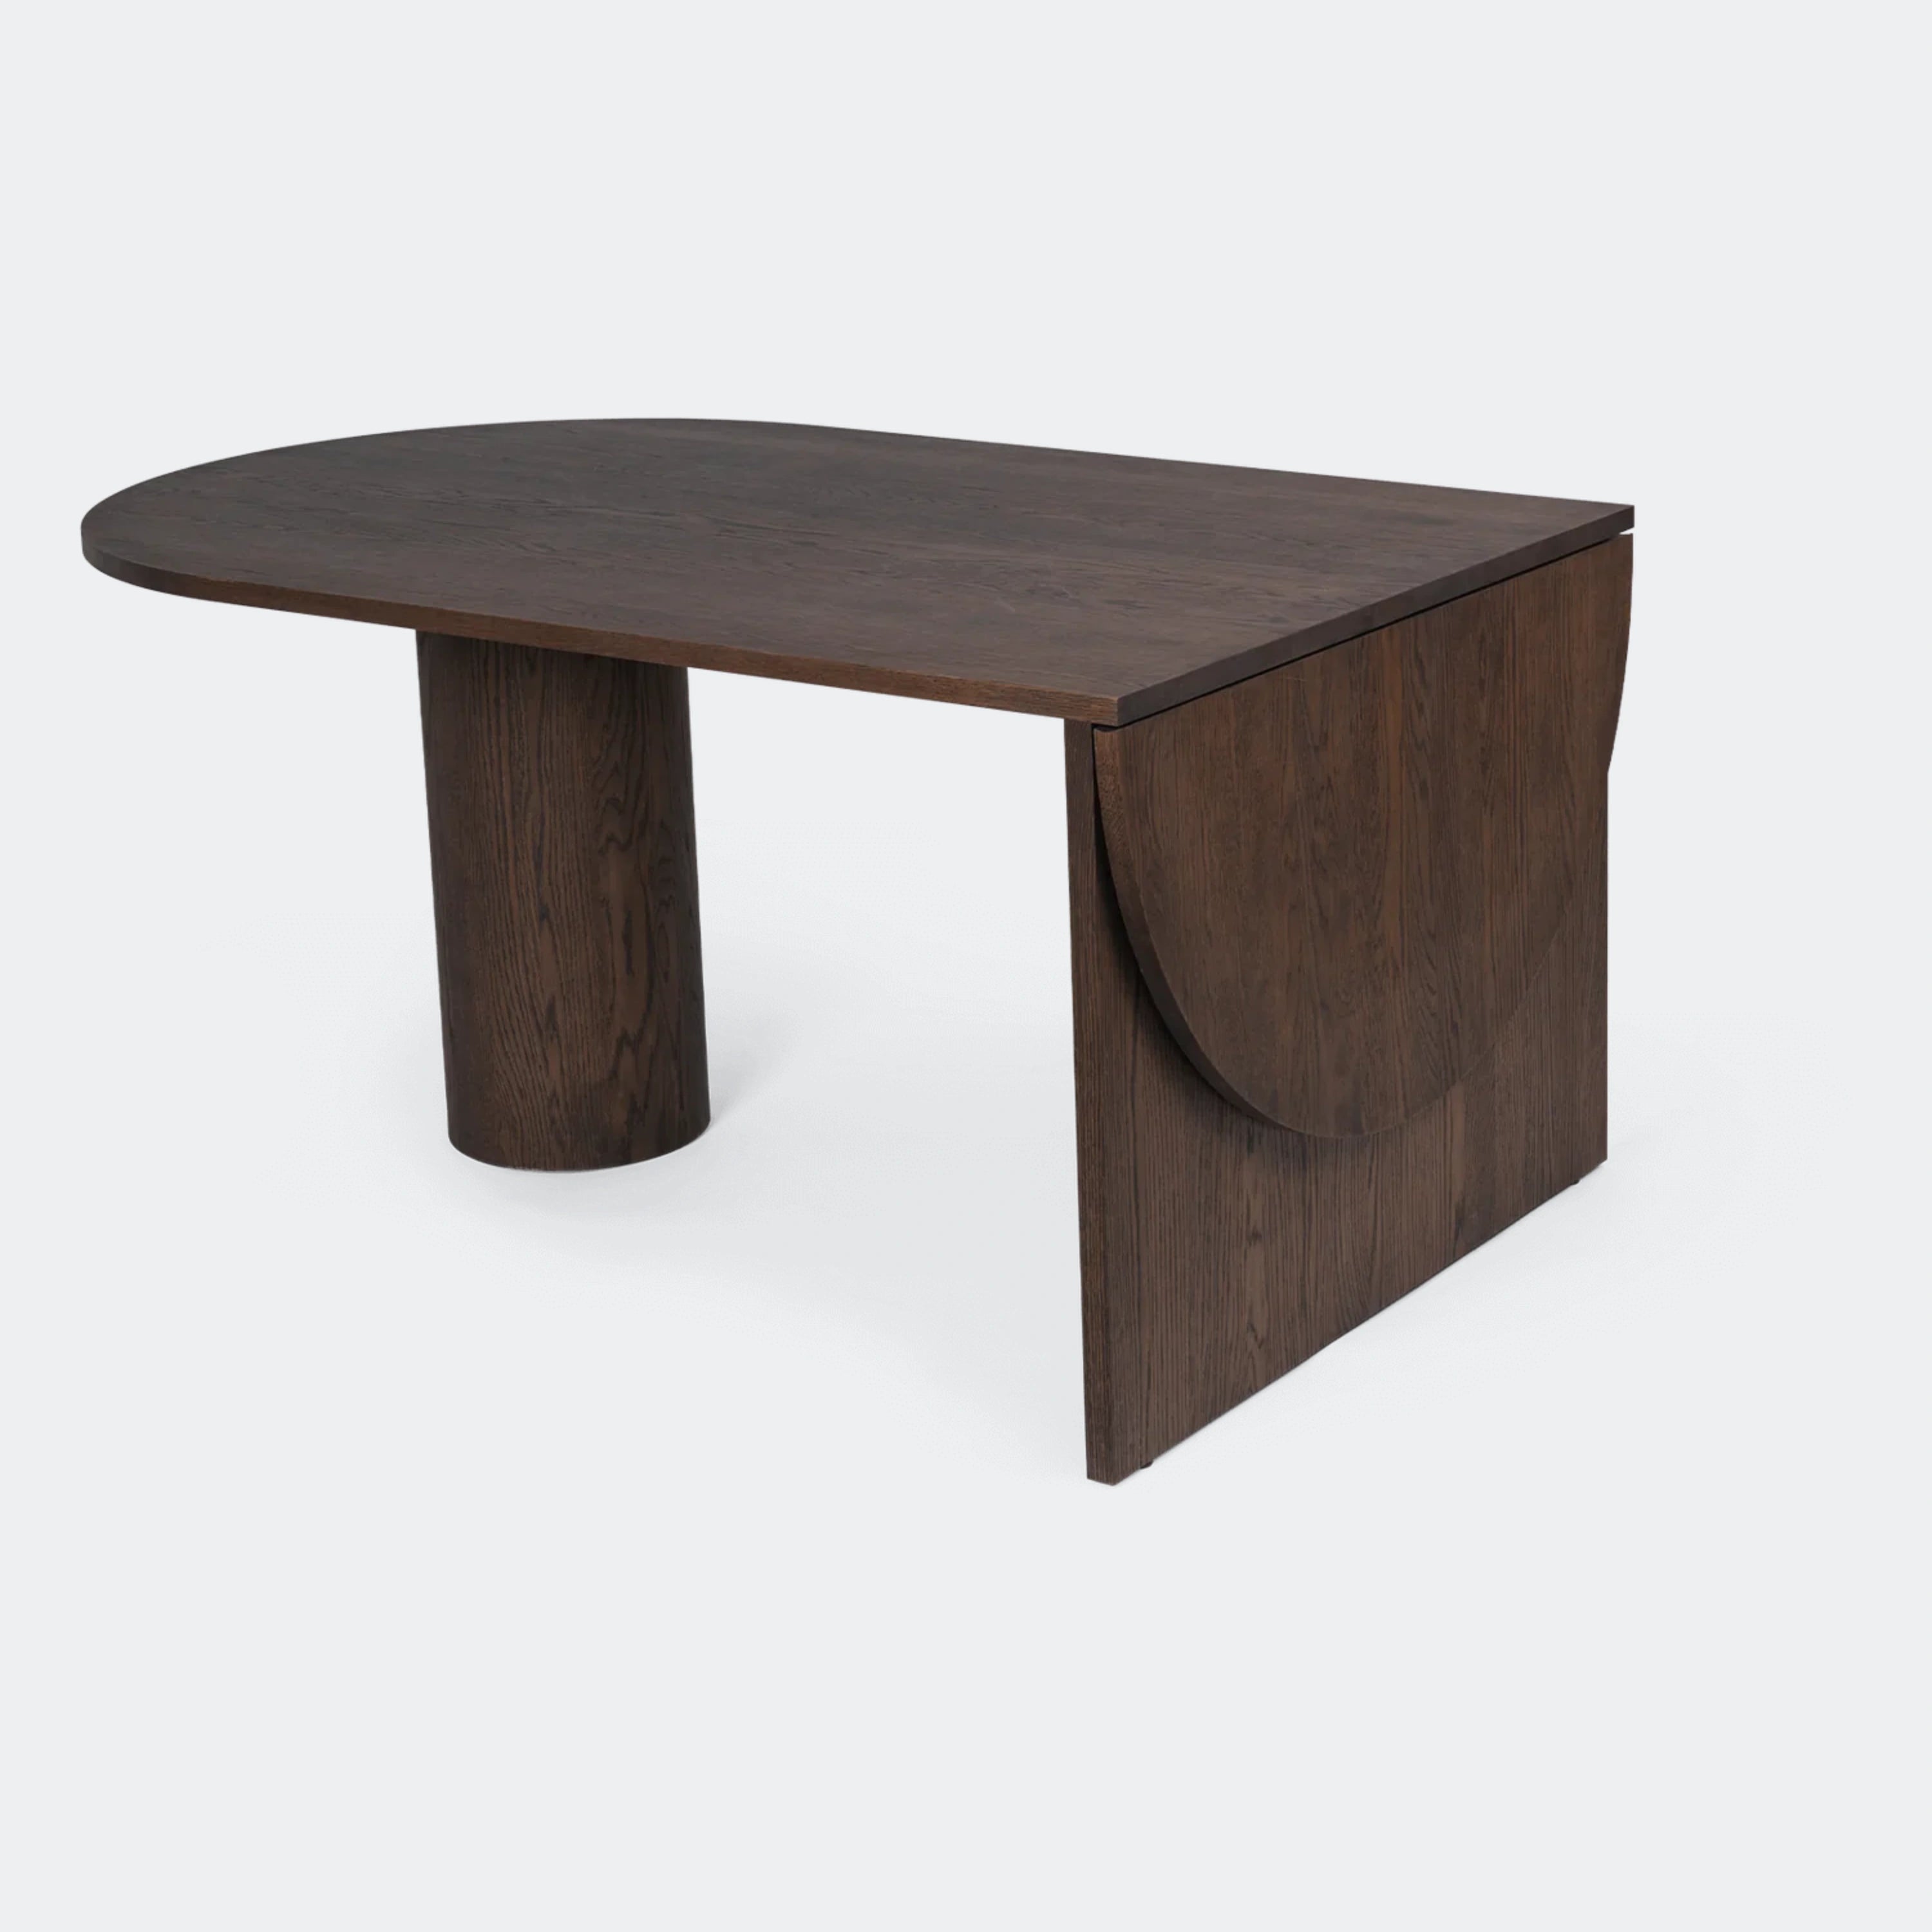 Ferm Living Pylo Dining Table - Dark Stained - KANSO